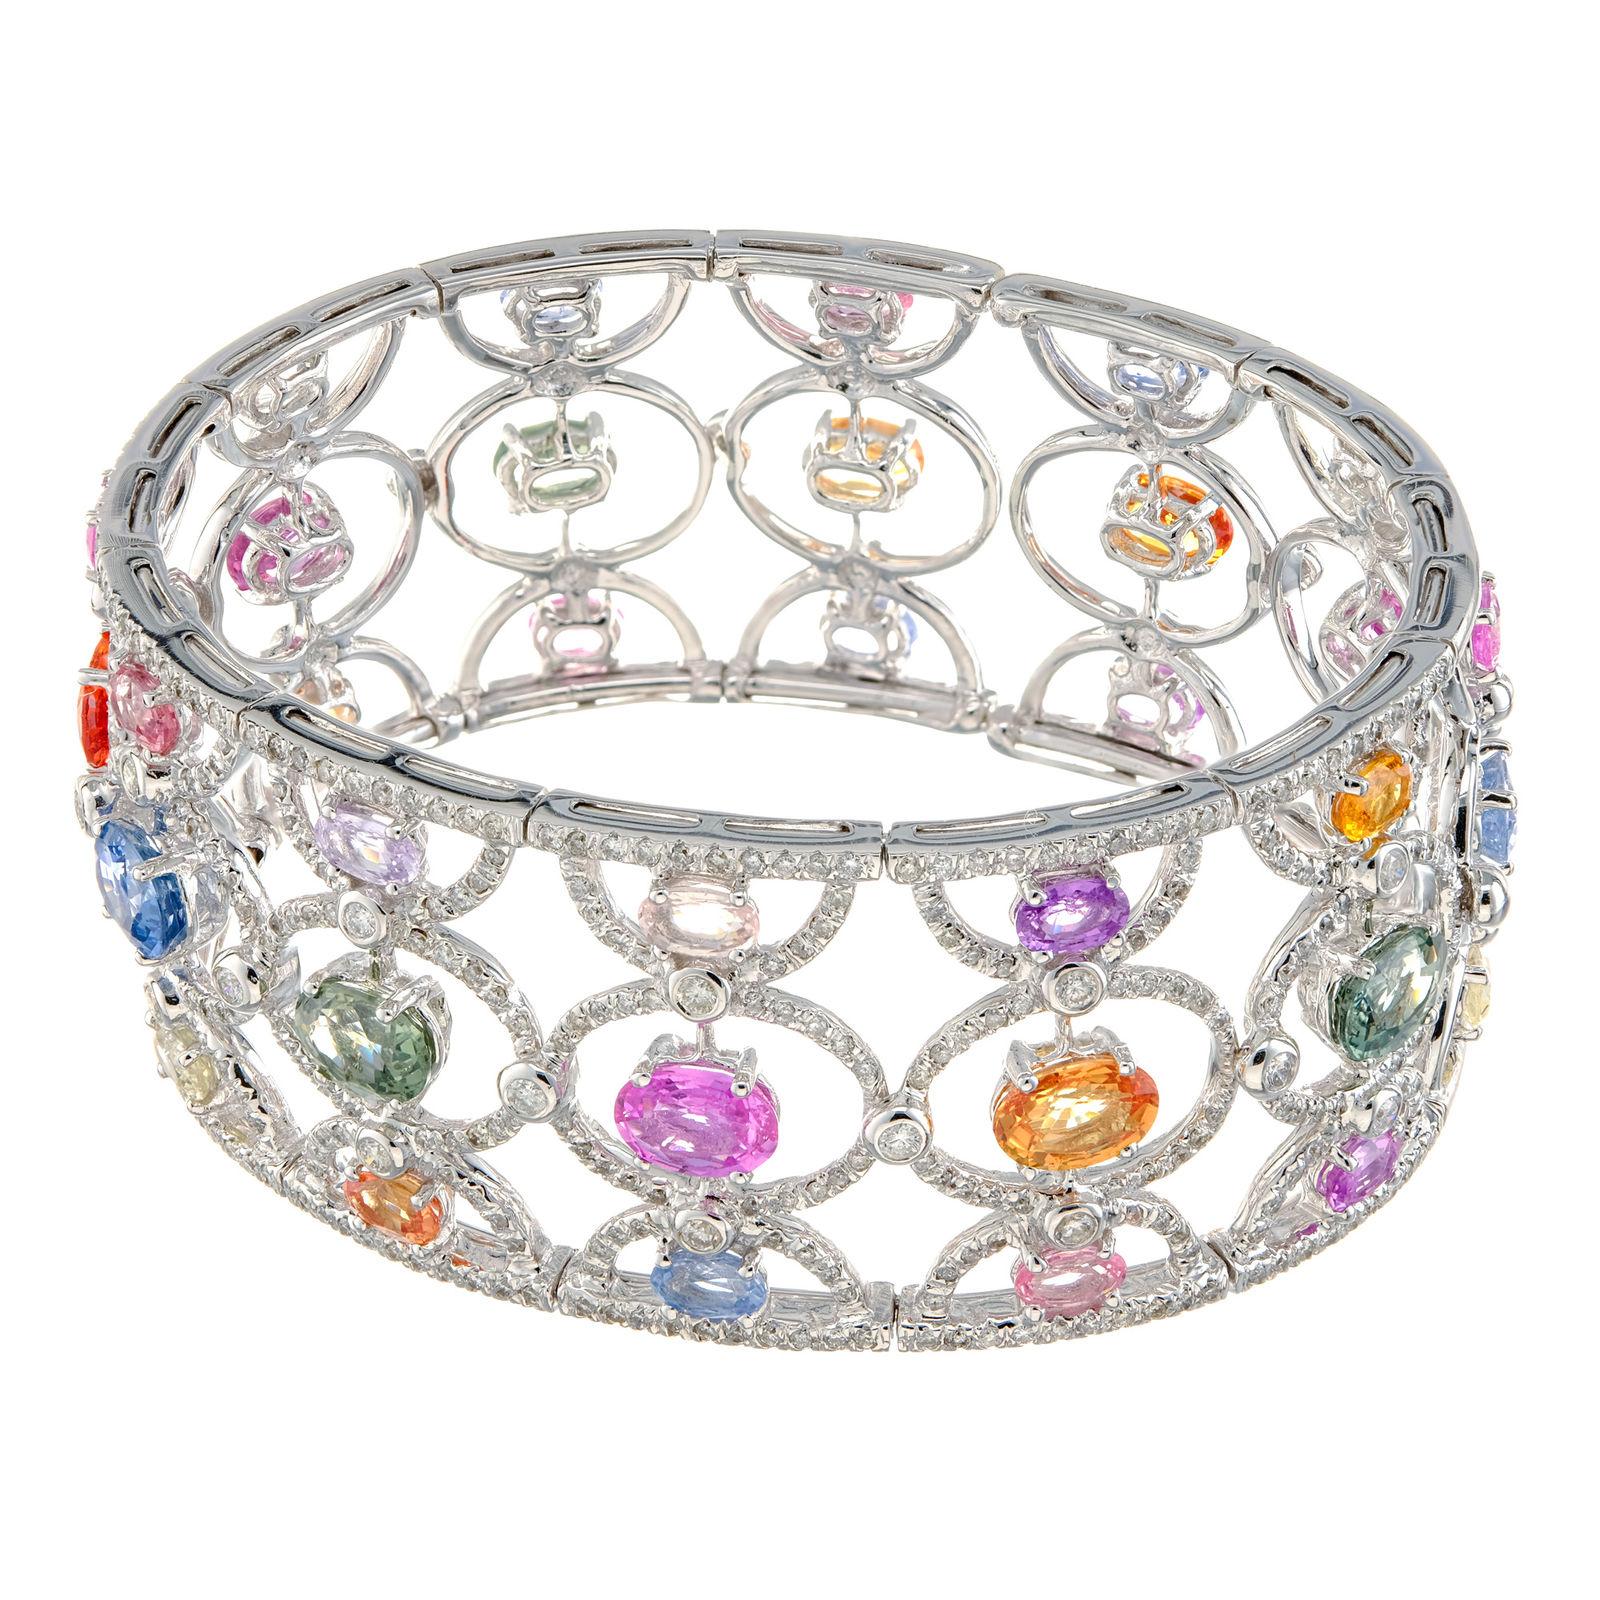 GIA certified. Multi-color sapphire and white diamond cuff bangle bracelet. Oval sapphires purple, pink, green, orange, accented with round diamonds in an open work 18k white gold bracelet.

36 Oval Multi-Color Sapphires. Approx. Total Weight.